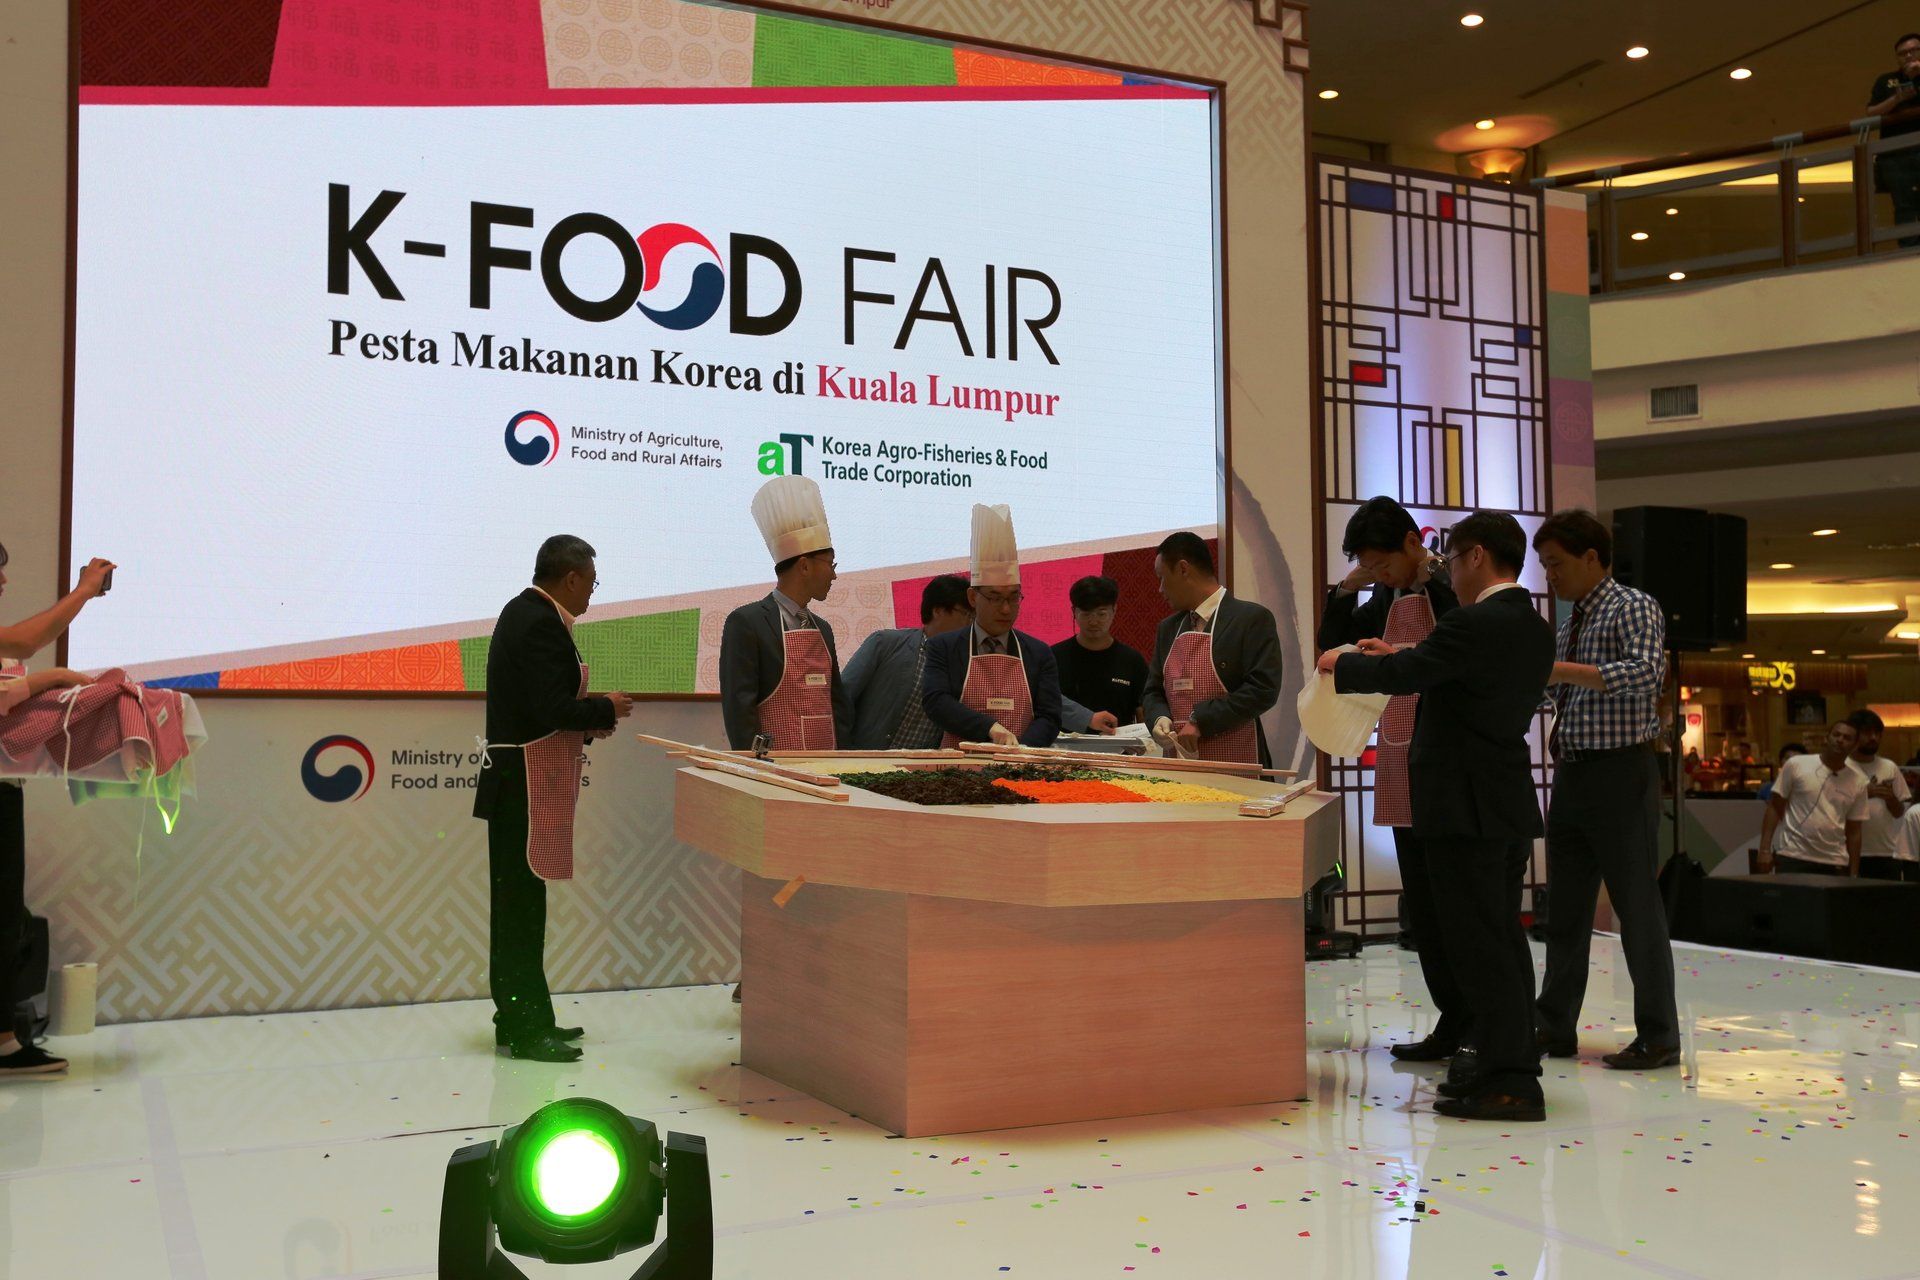 K-Food Fair 2016 @ Malaysia. Booth designed and built by Essential Global Fairs.